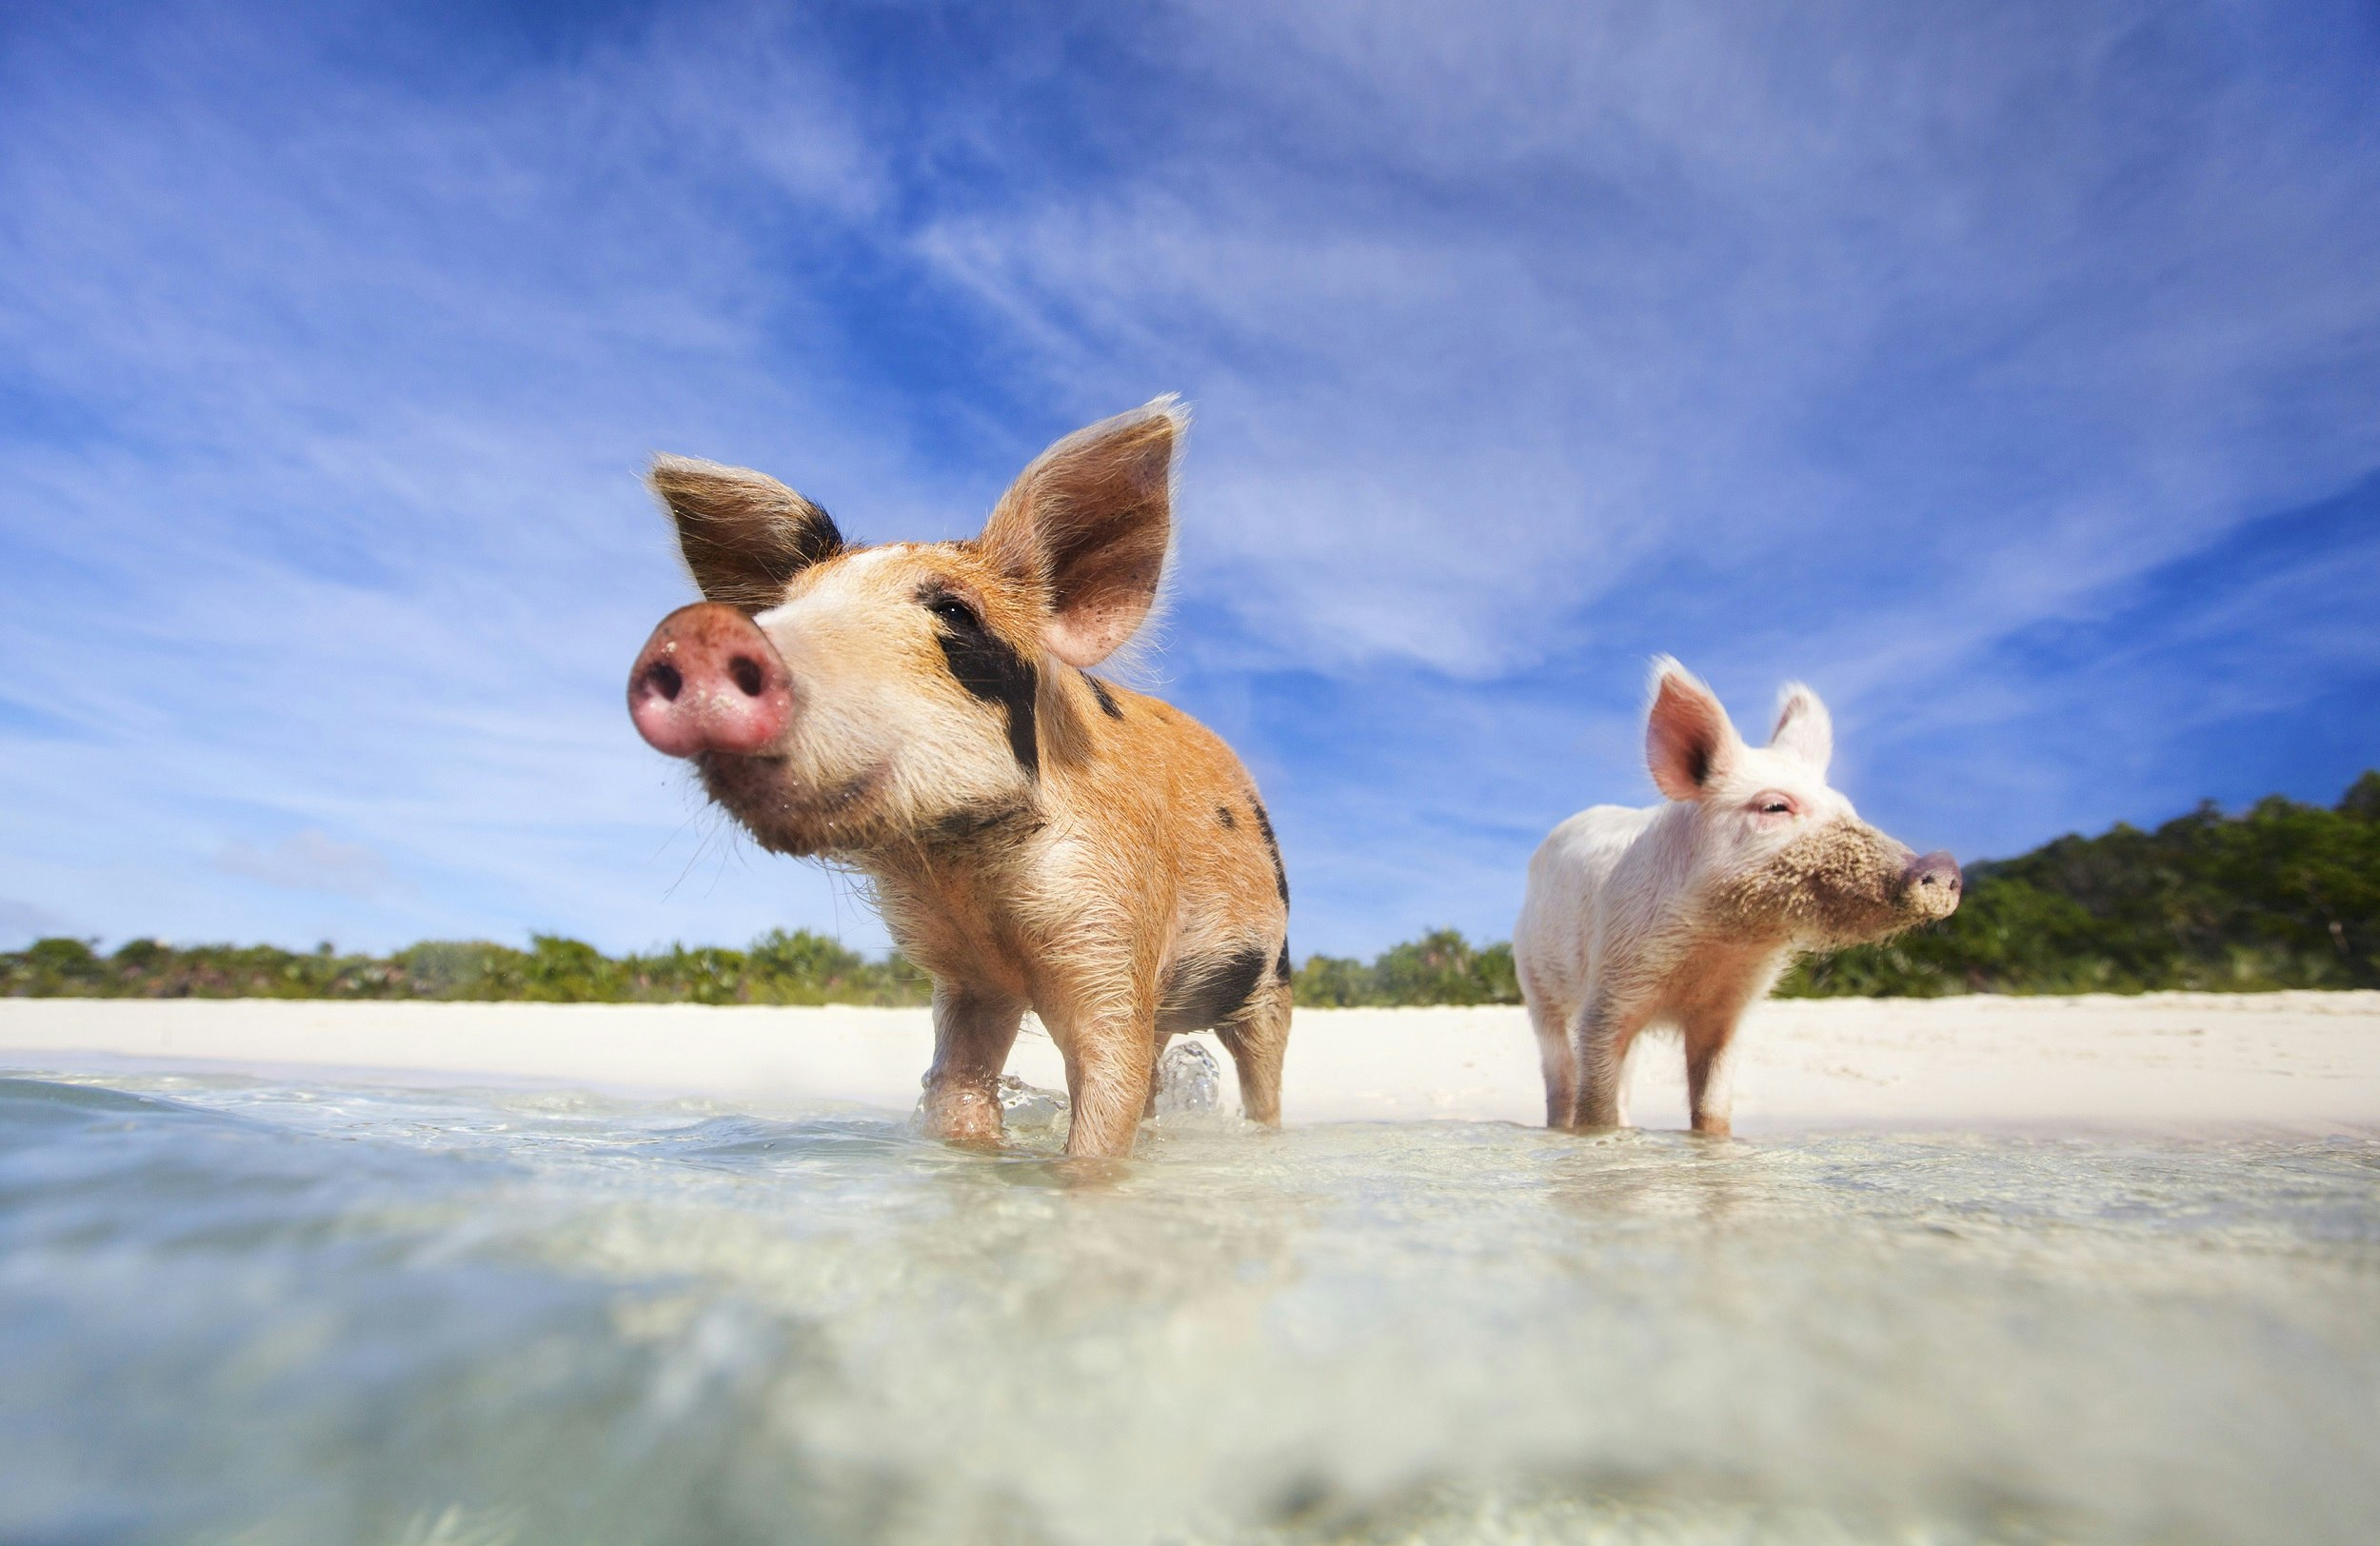 Two pigs standing in the shallows of a beautiful beach.